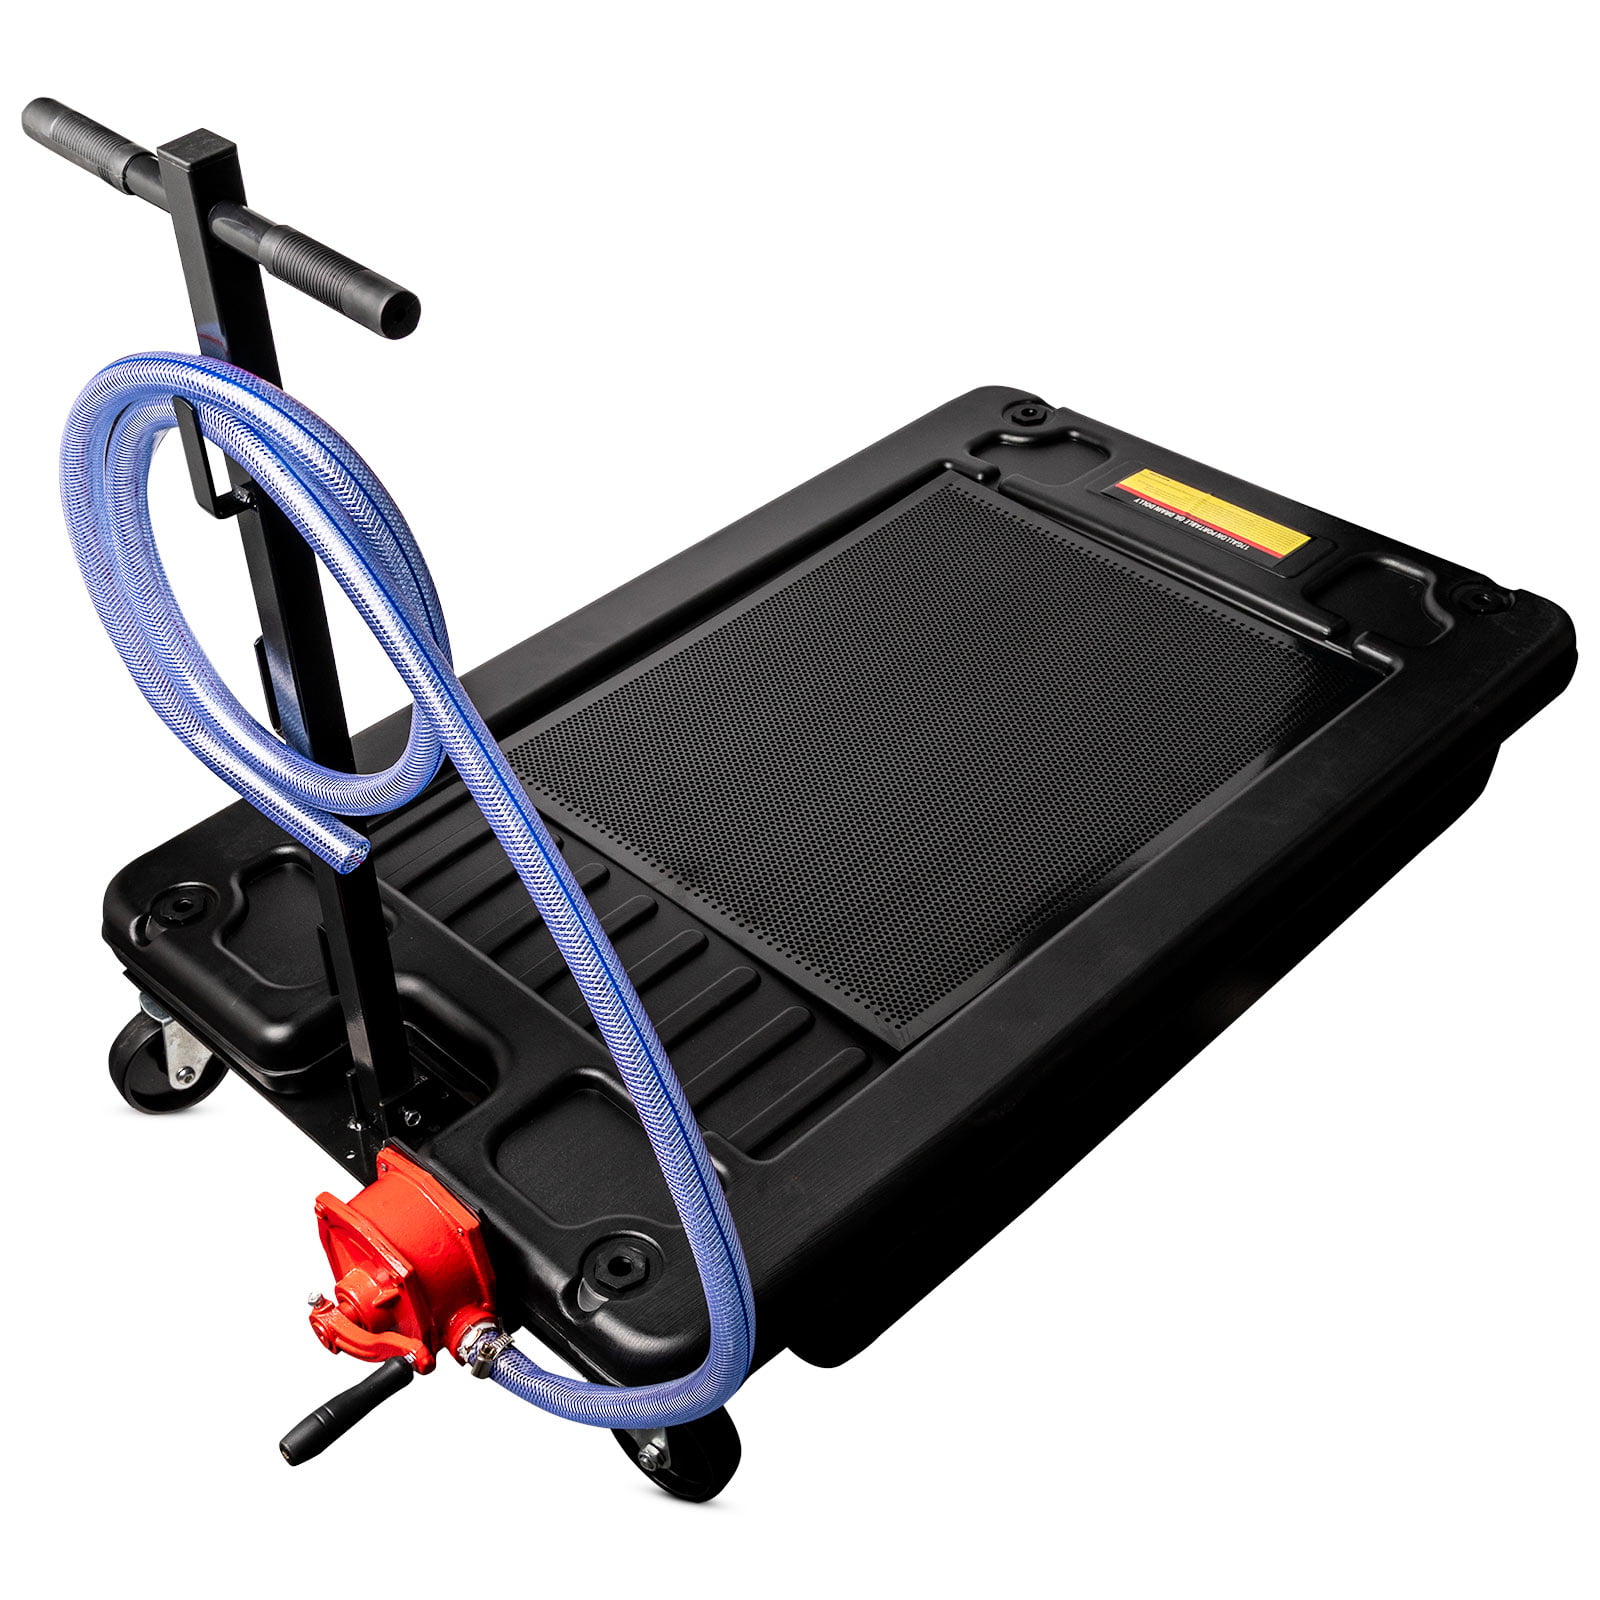 SSLine Portable 15 Gallon Oil Drain Pan with Electric Pump Low Profile Oil Change Pan Dolly with 7ft Hose and Rolling Casters for Trucks Cars SUVs 15 Gallon with Electric Pump 